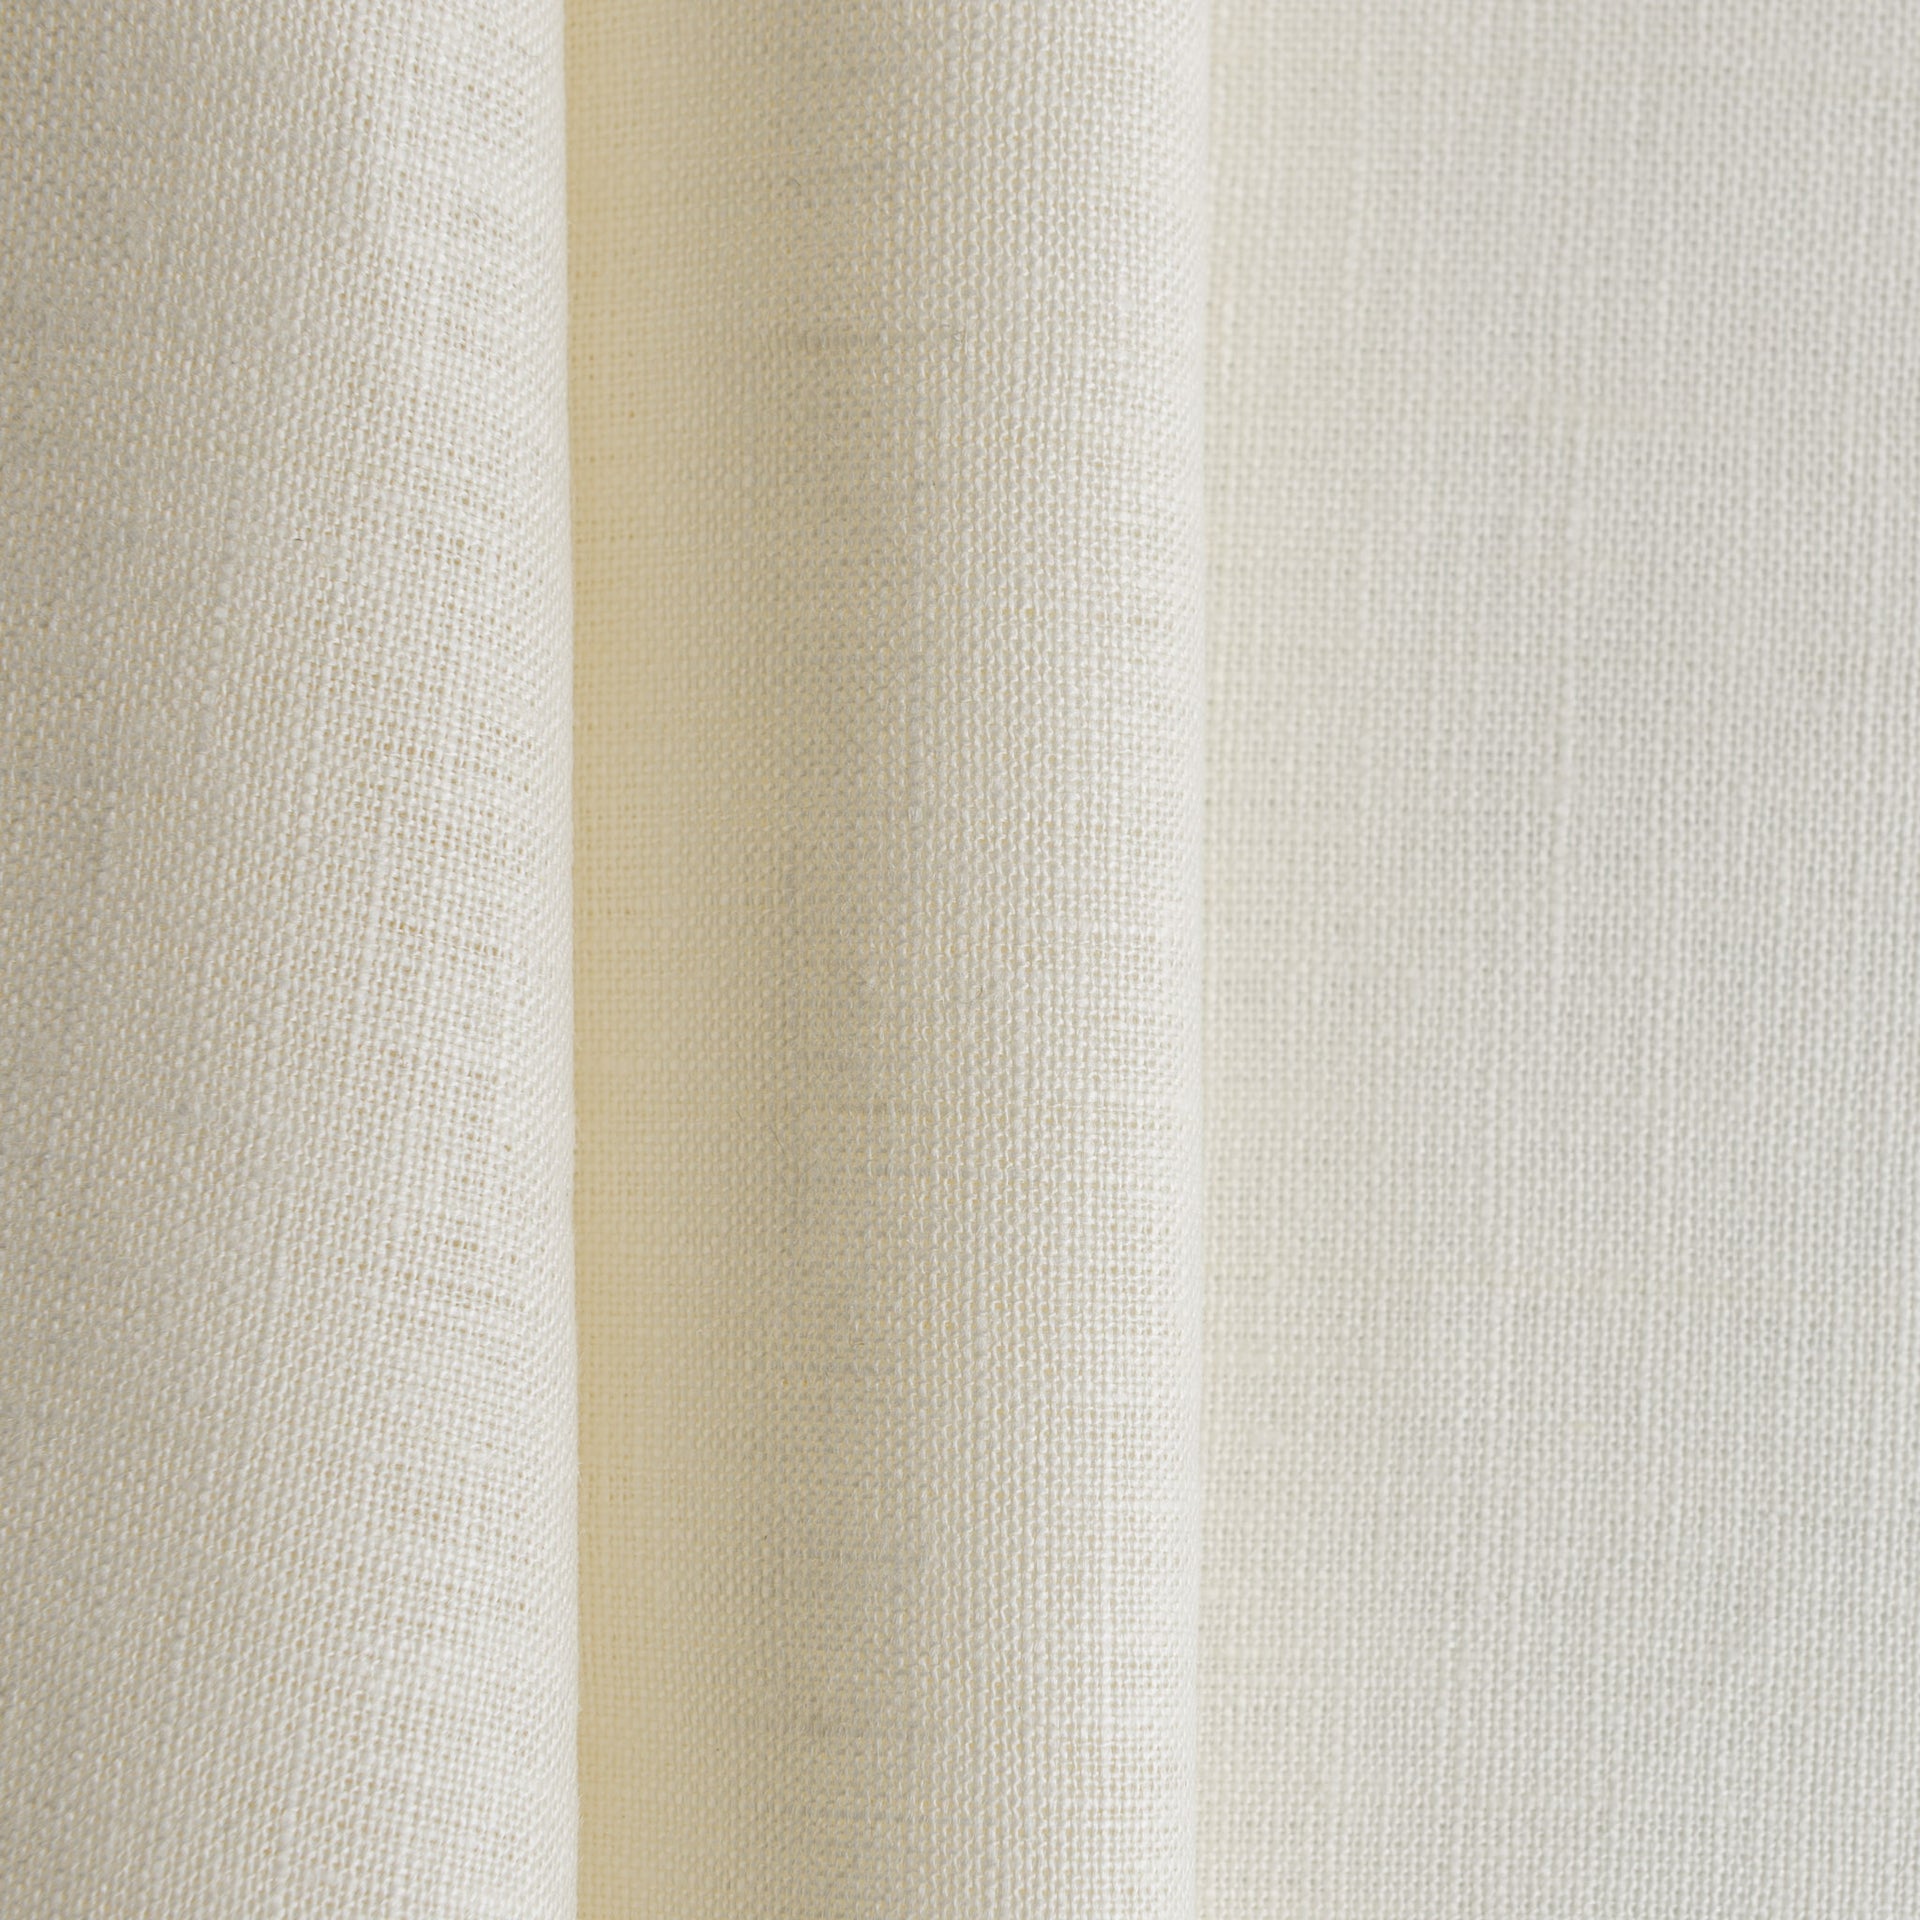 Cream Tab Top Linen Curtain with Cotton Lining - Privacy Linen Curtains with Custom Width and Length